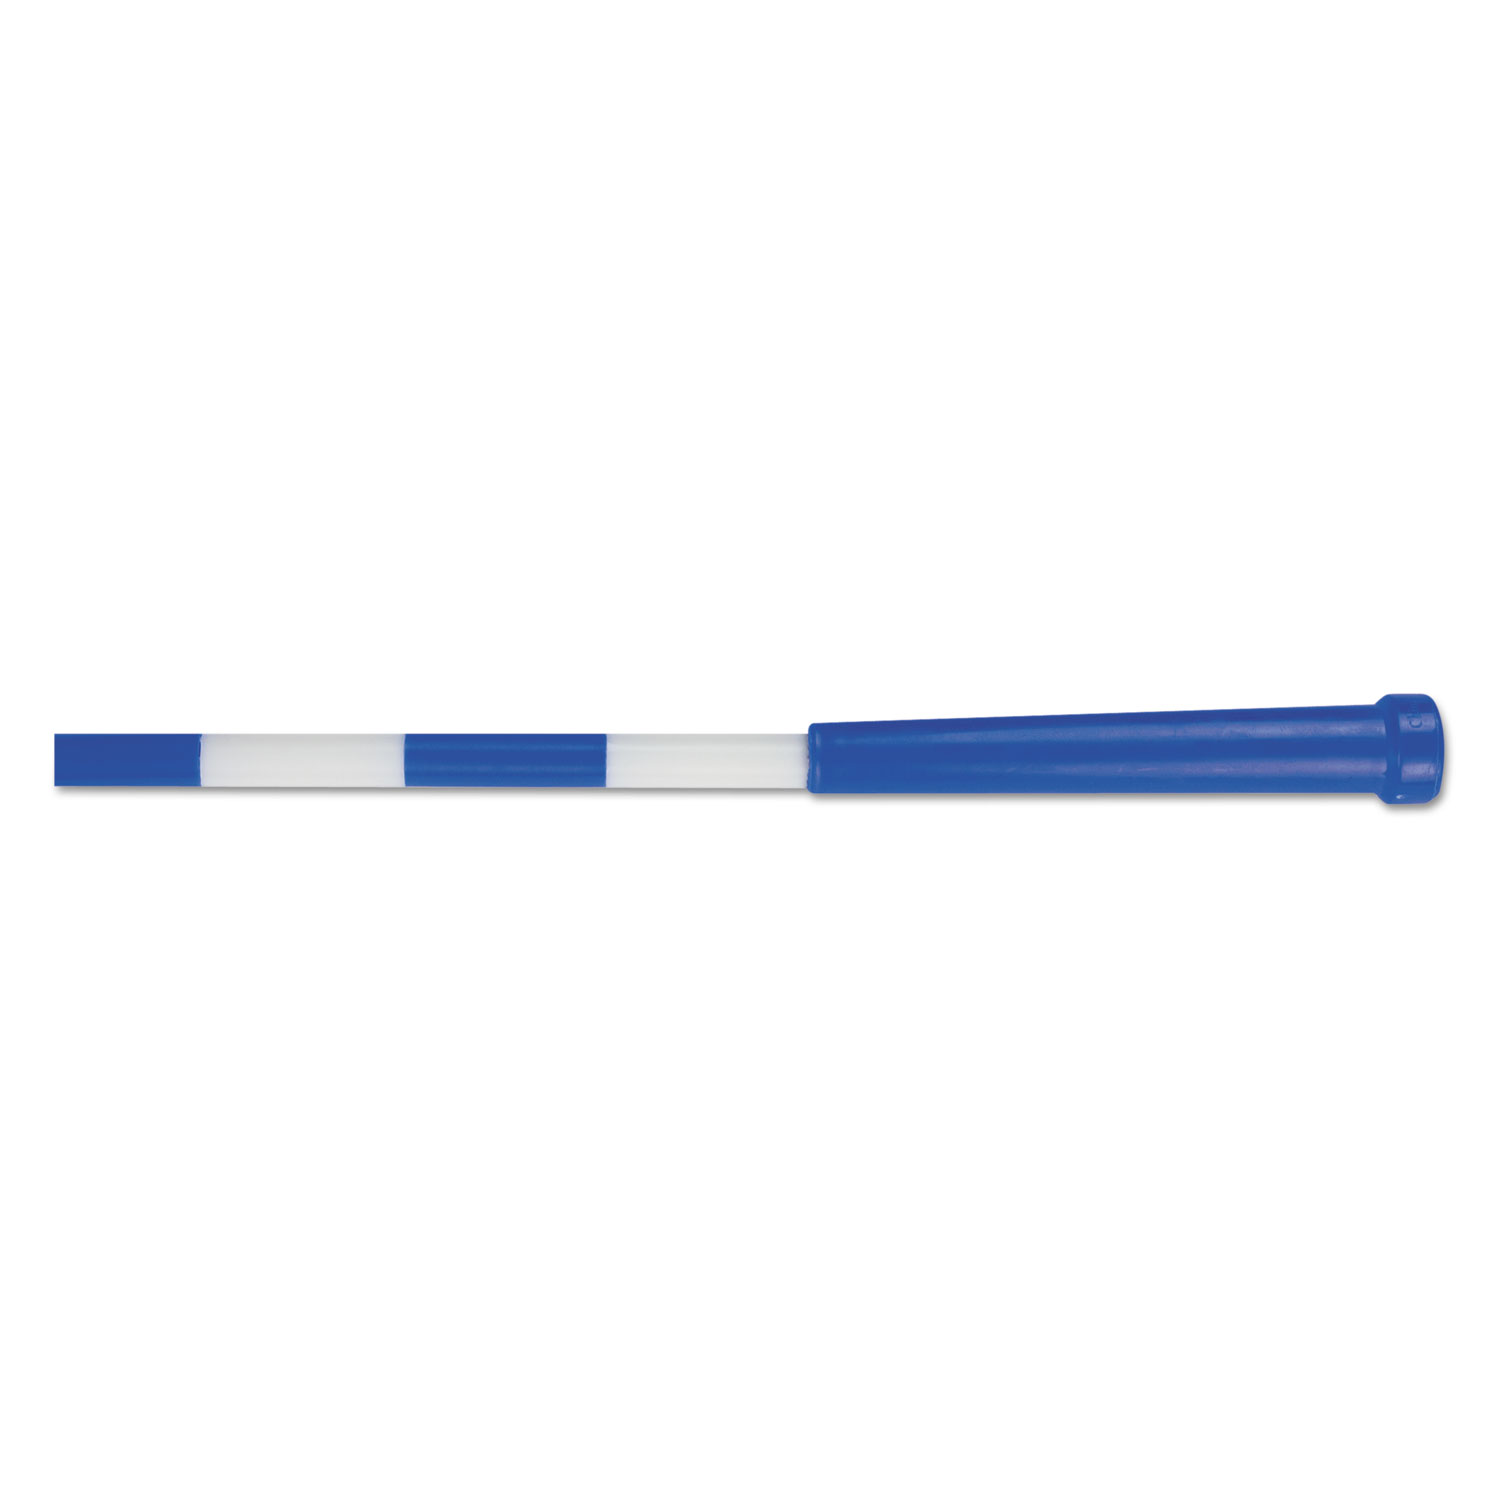 Licorice Speed Rope, 9 ft, Blue Handle